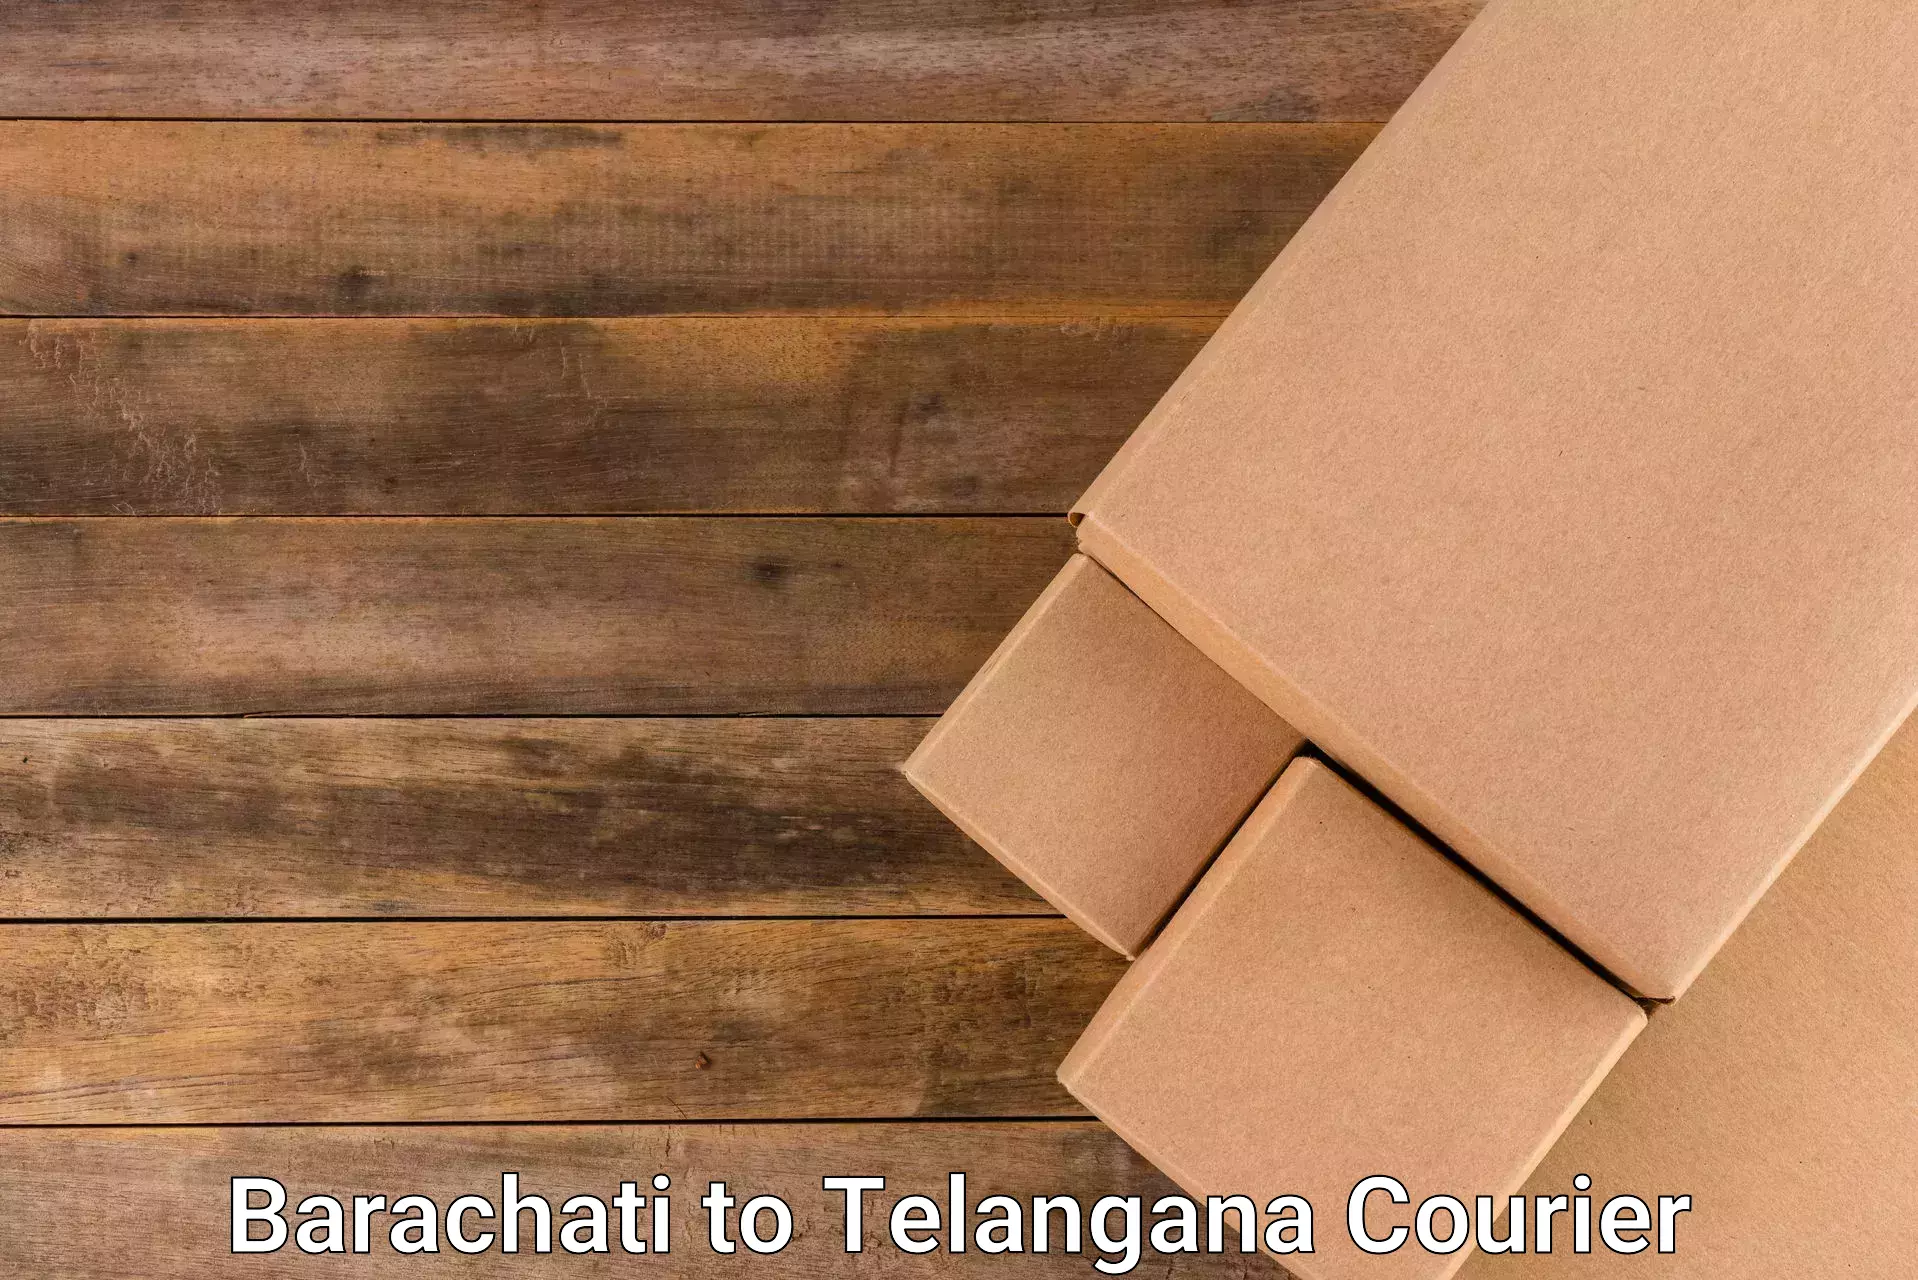 End-to-end delivery Barachati to Kacheguda